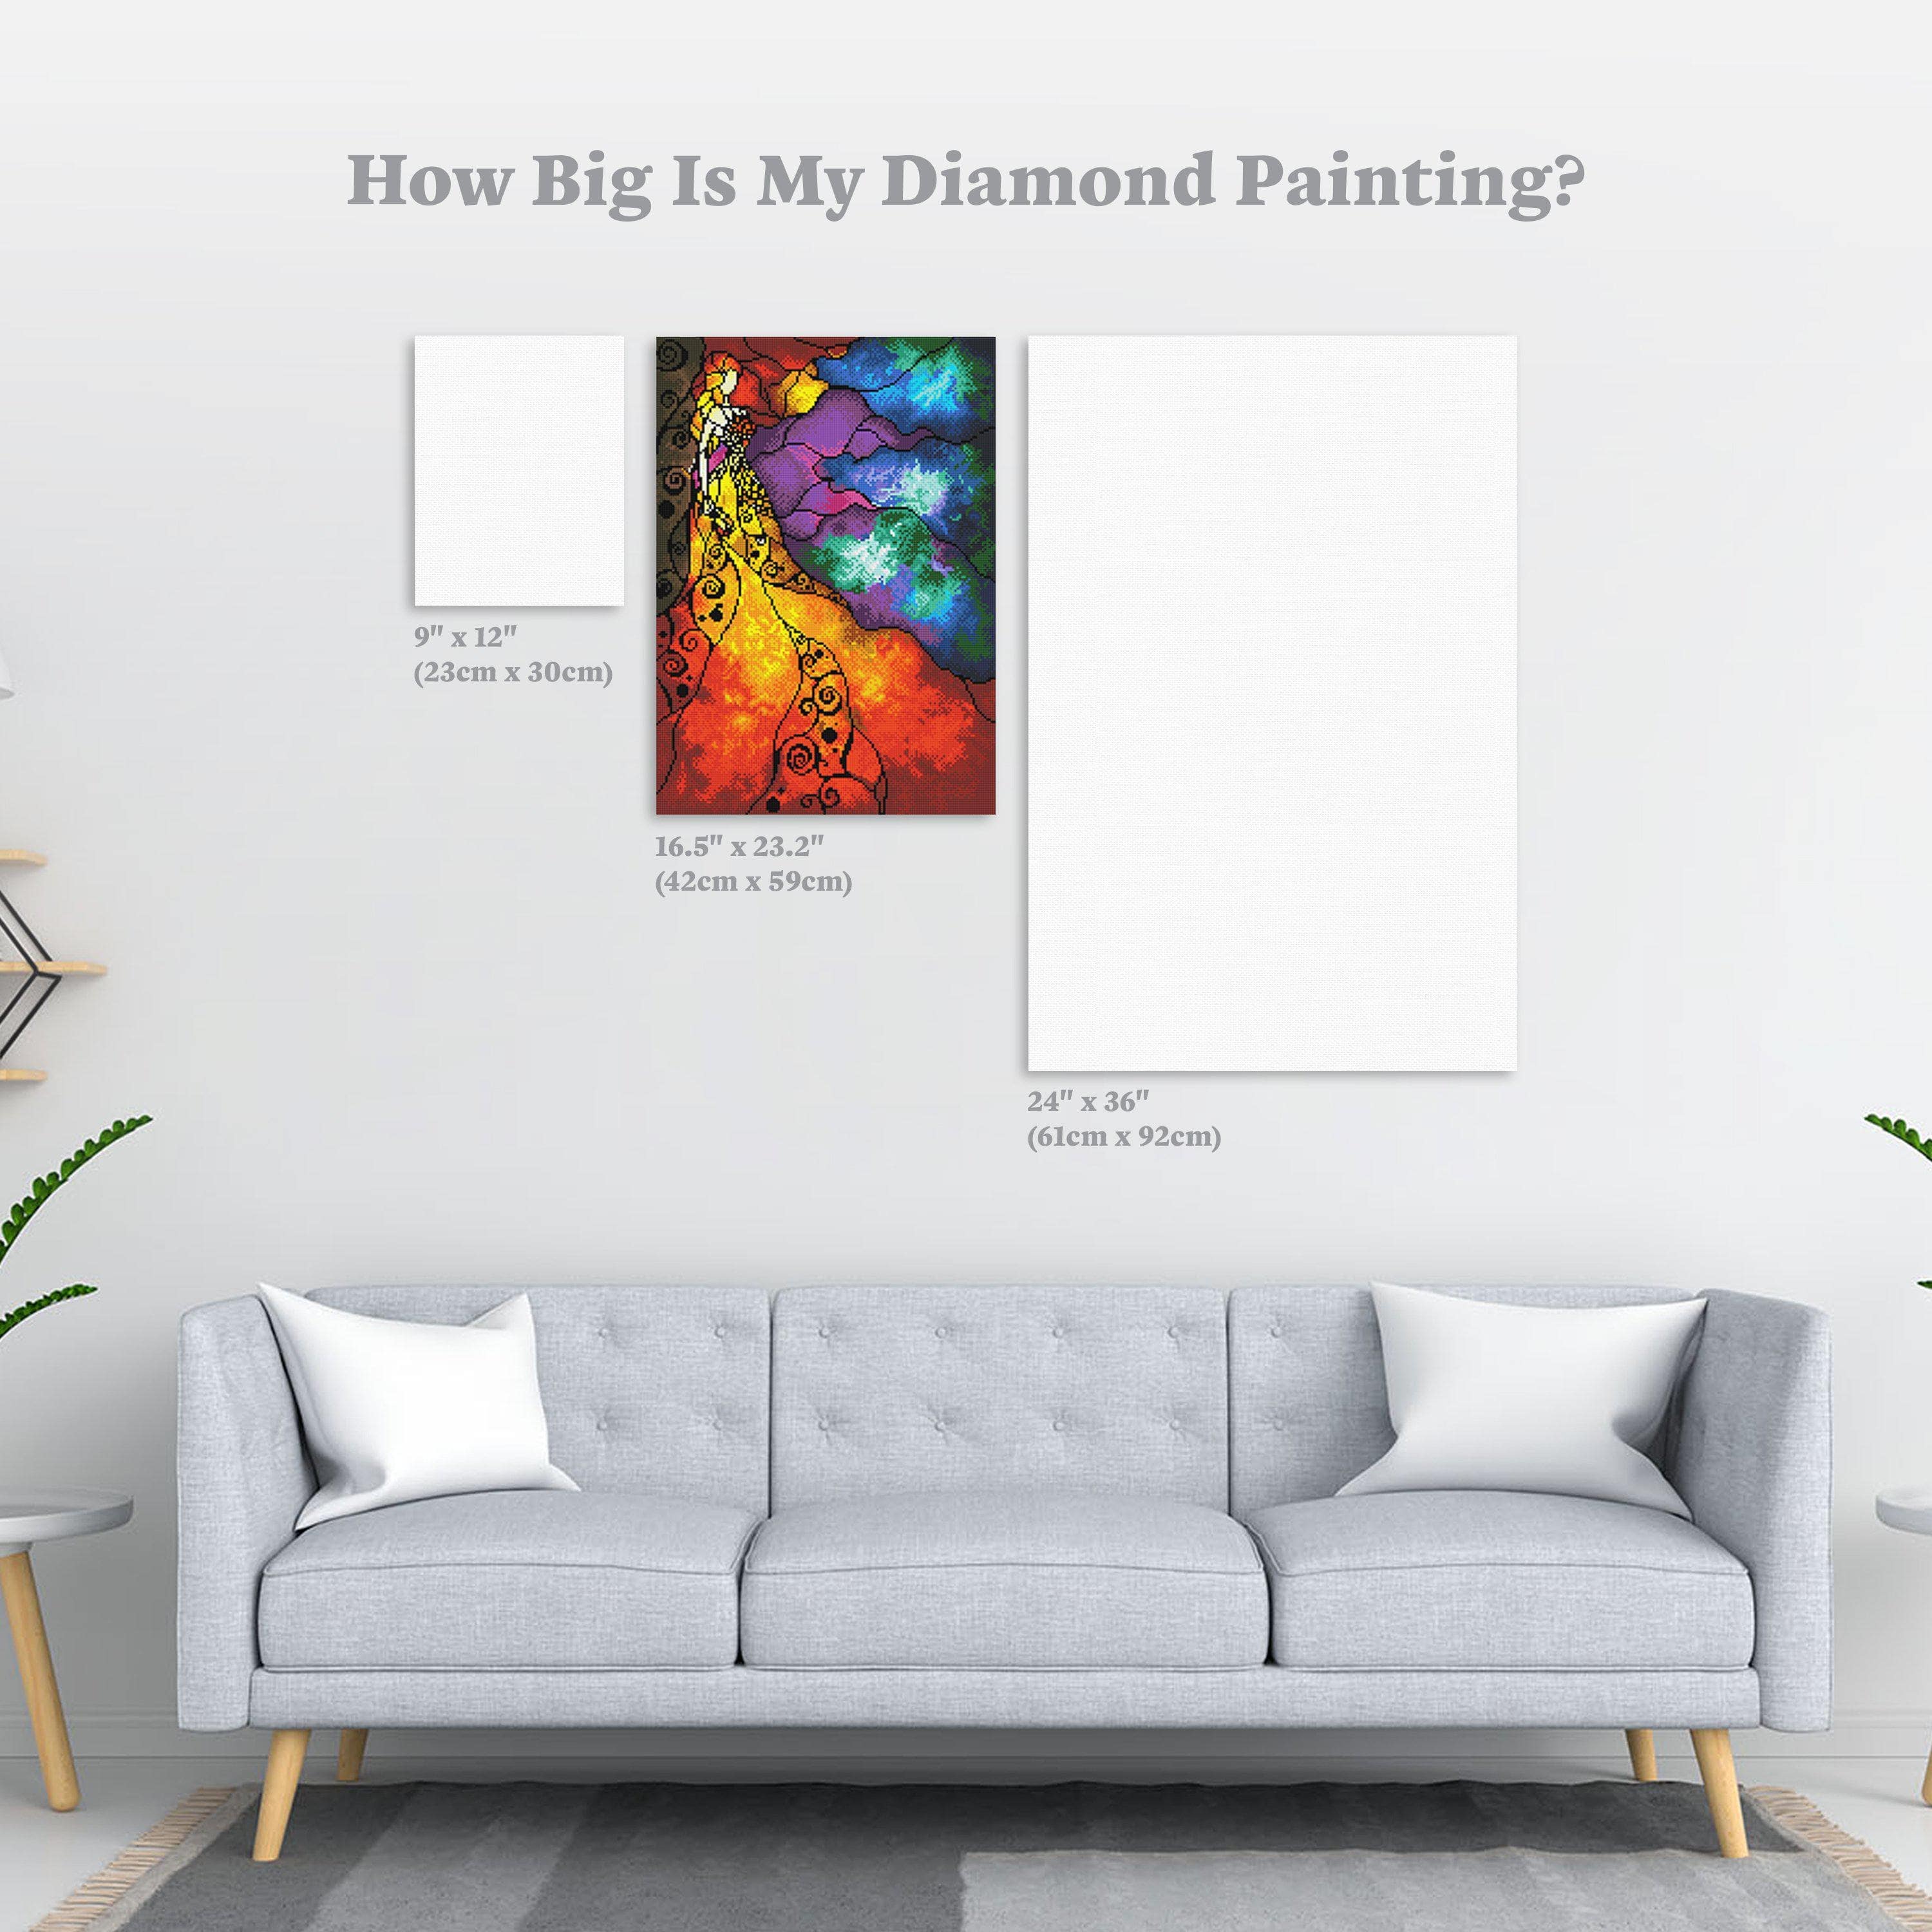  PALODIO DIY 5D Beauty Beauty Beast Diamond Painting by Number  Kits, Crystal Rhinestone Diamond Embroidery Paintings Pictures Arts Craft  for Home Wall Decor (12 X 16 Inch)